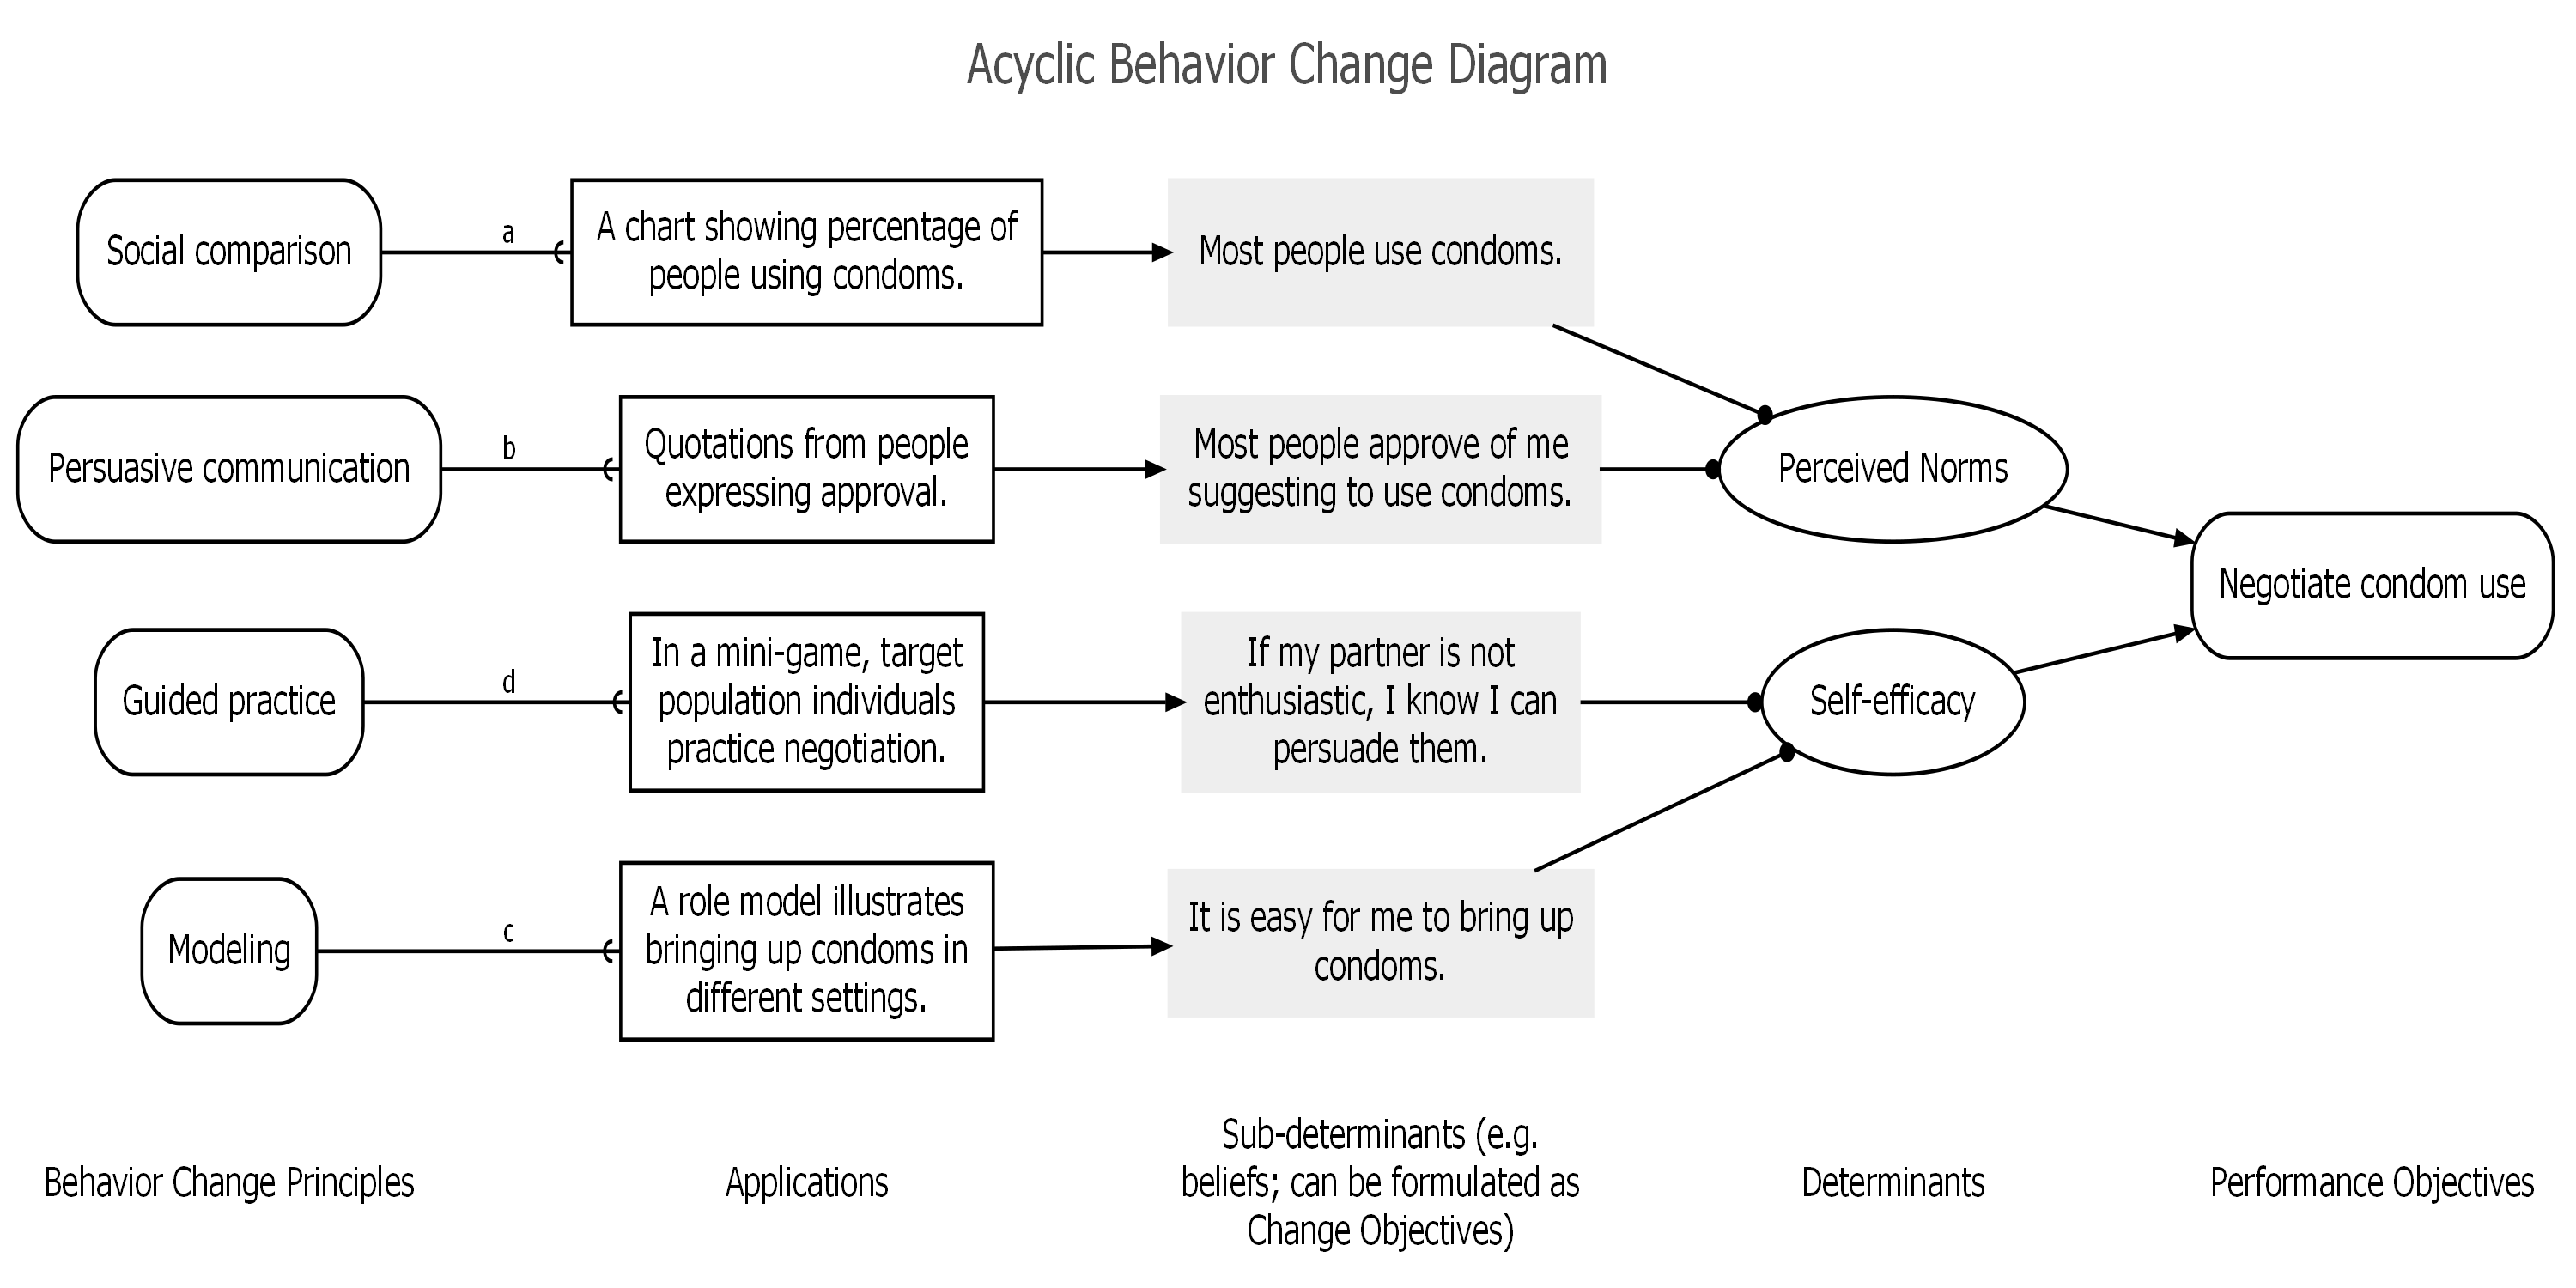 An ABCD with only one target behavior and no specified conditions